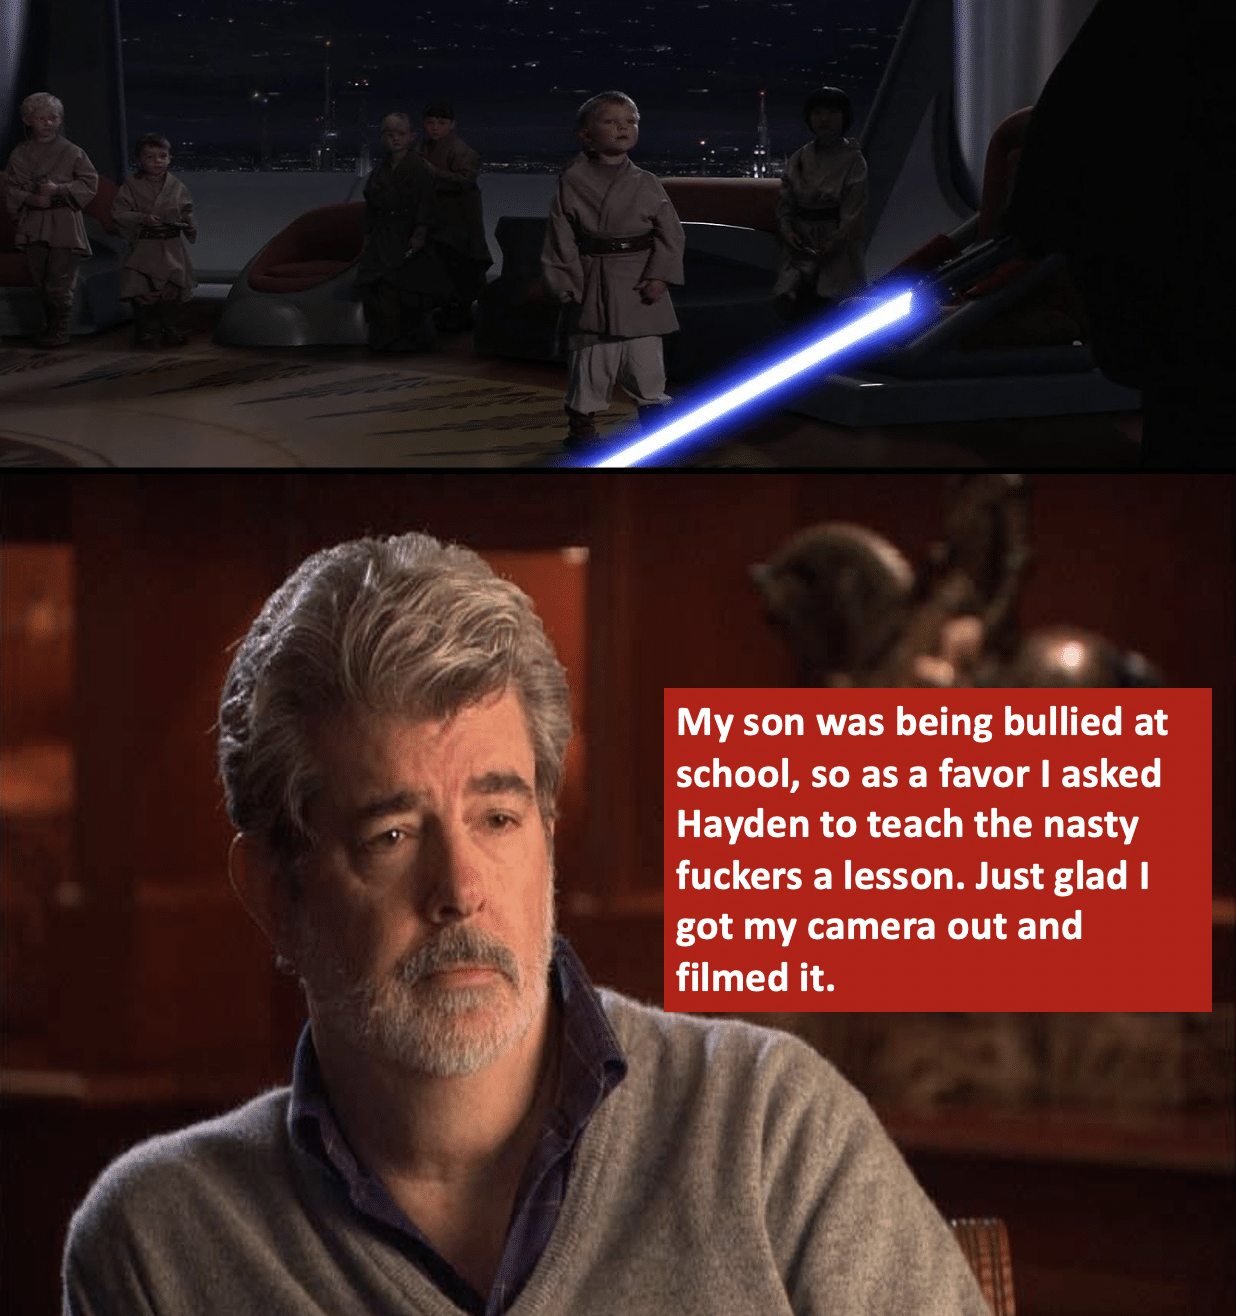 Prequel-memes, George, Jake Lloyd, Anakin, Hayden, George Lucas Star Wars Memes Prequel-memes, George, Jake Lloyd, Anakin, Hayden, George Lucas text: My son was being bullied at school, so as a favor I asked Hayden to teach the nasty fuckers a lesson. Just glad I got my camera out and filmed it. 